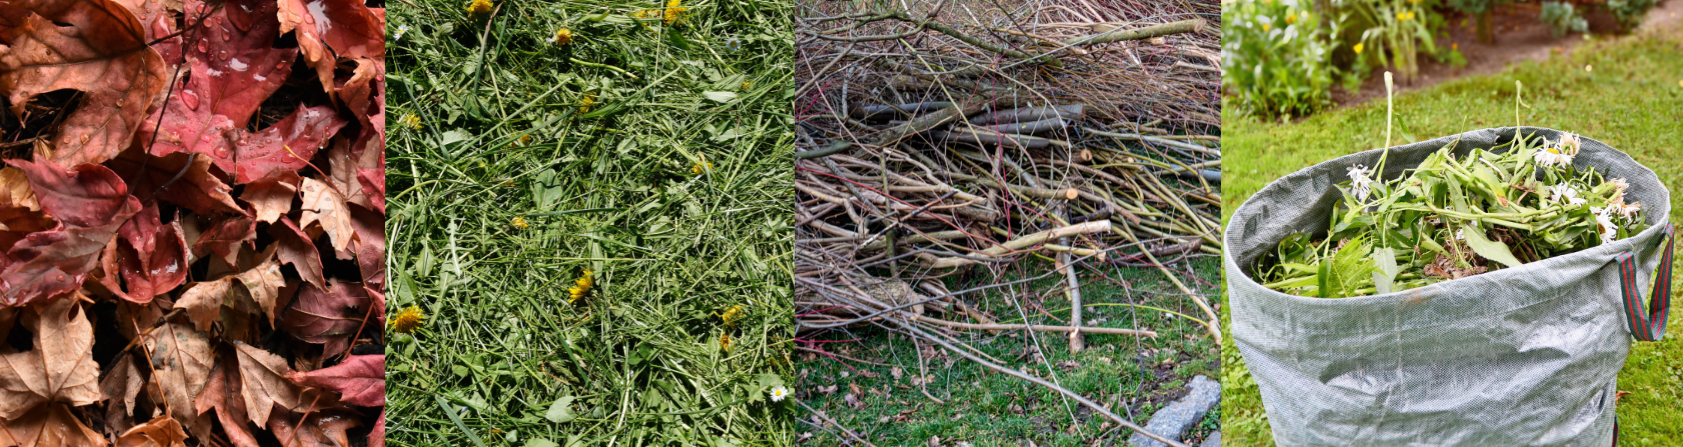 Row of pics shows dried leaves, grass clippings, a pile of small diameter brush, and a bag of weeds, all types of yard waste